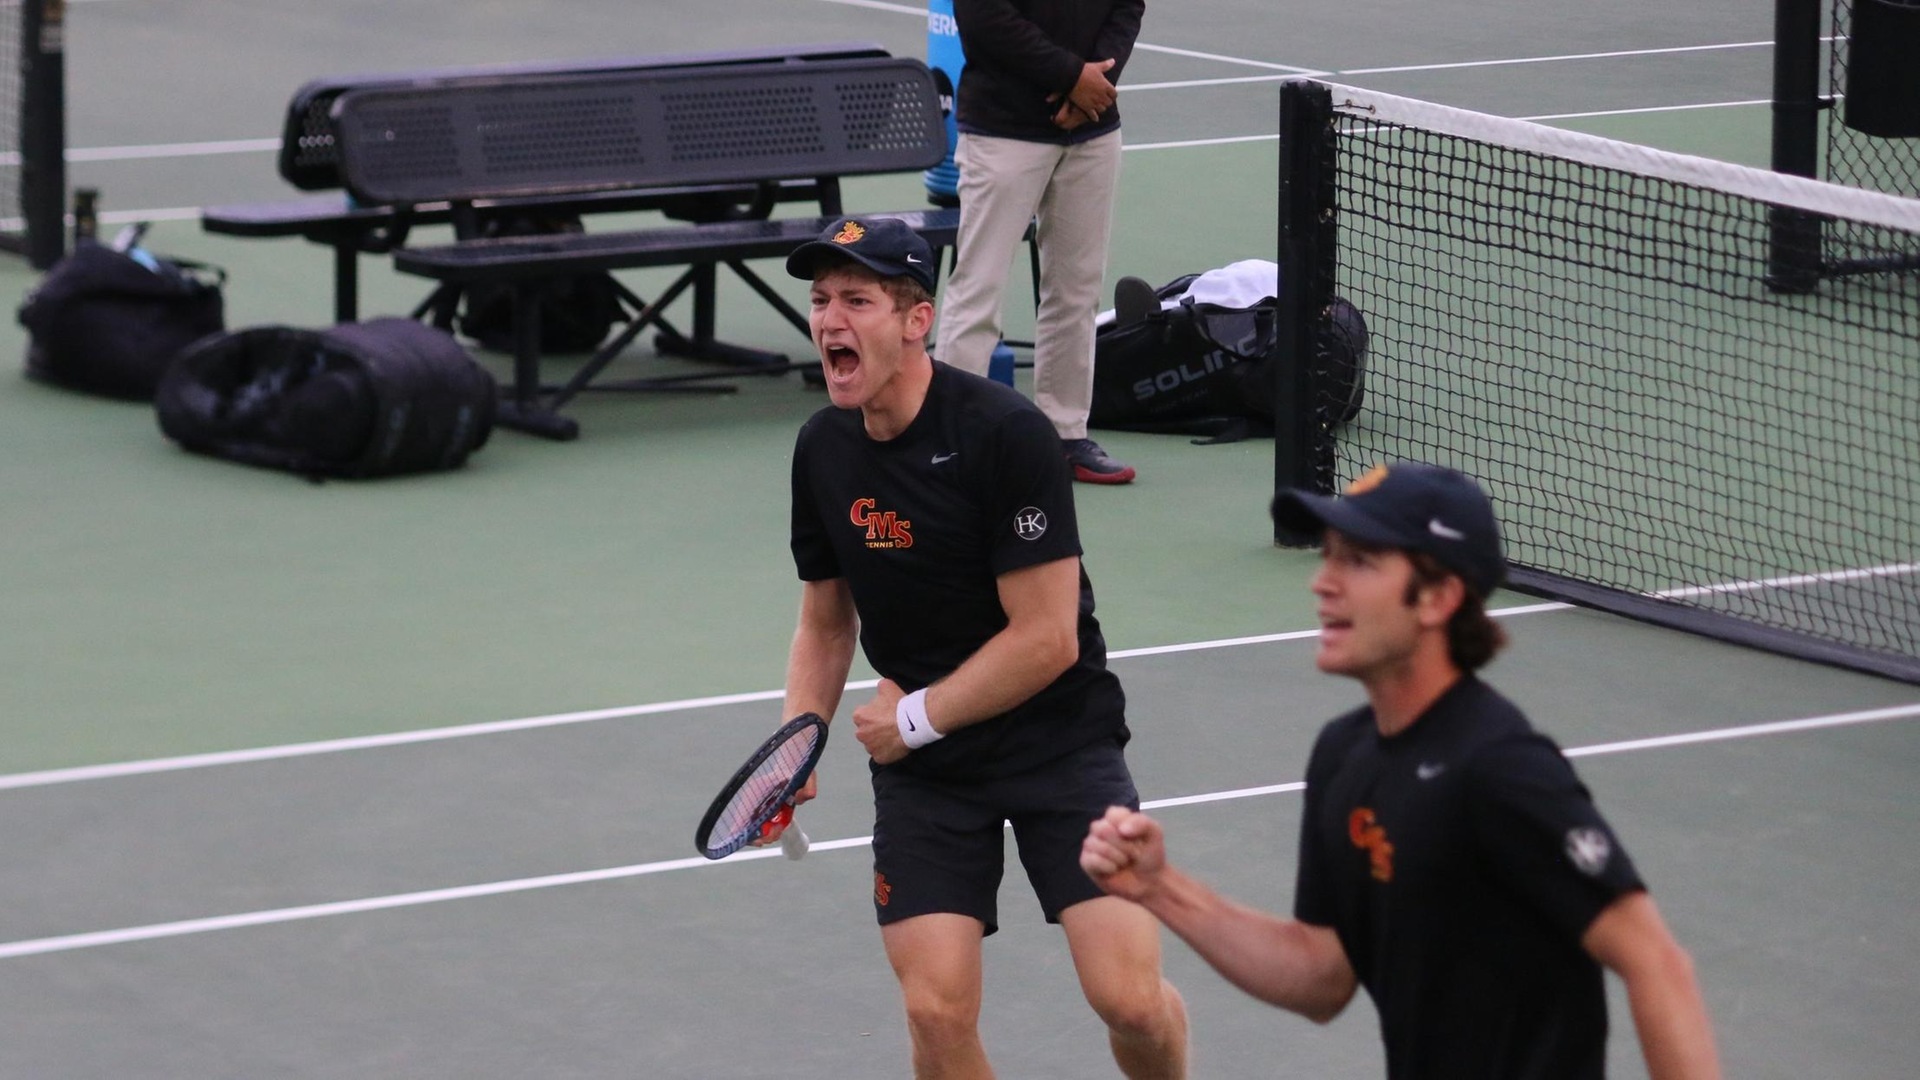 Matthew Robinson and Ian Freer celebrate their 8-6 doubles win